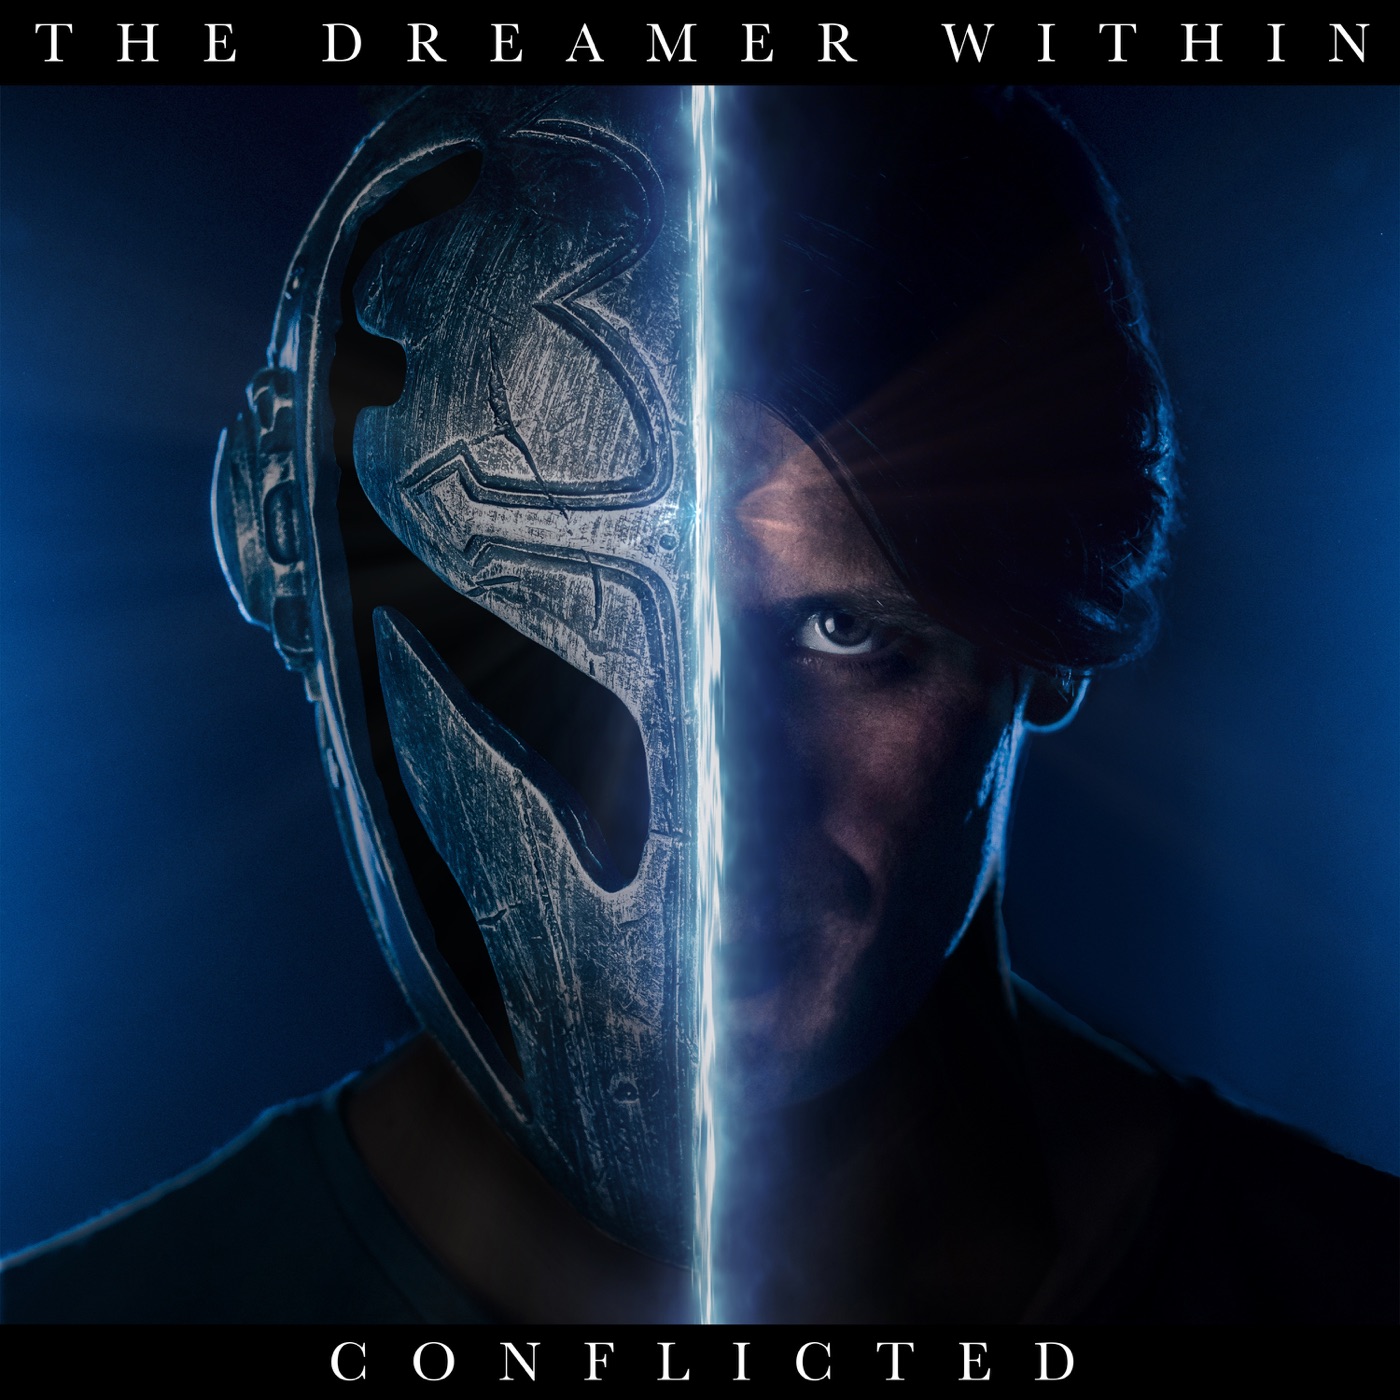 The Dreamer Within - Conflicted [single] (2017)